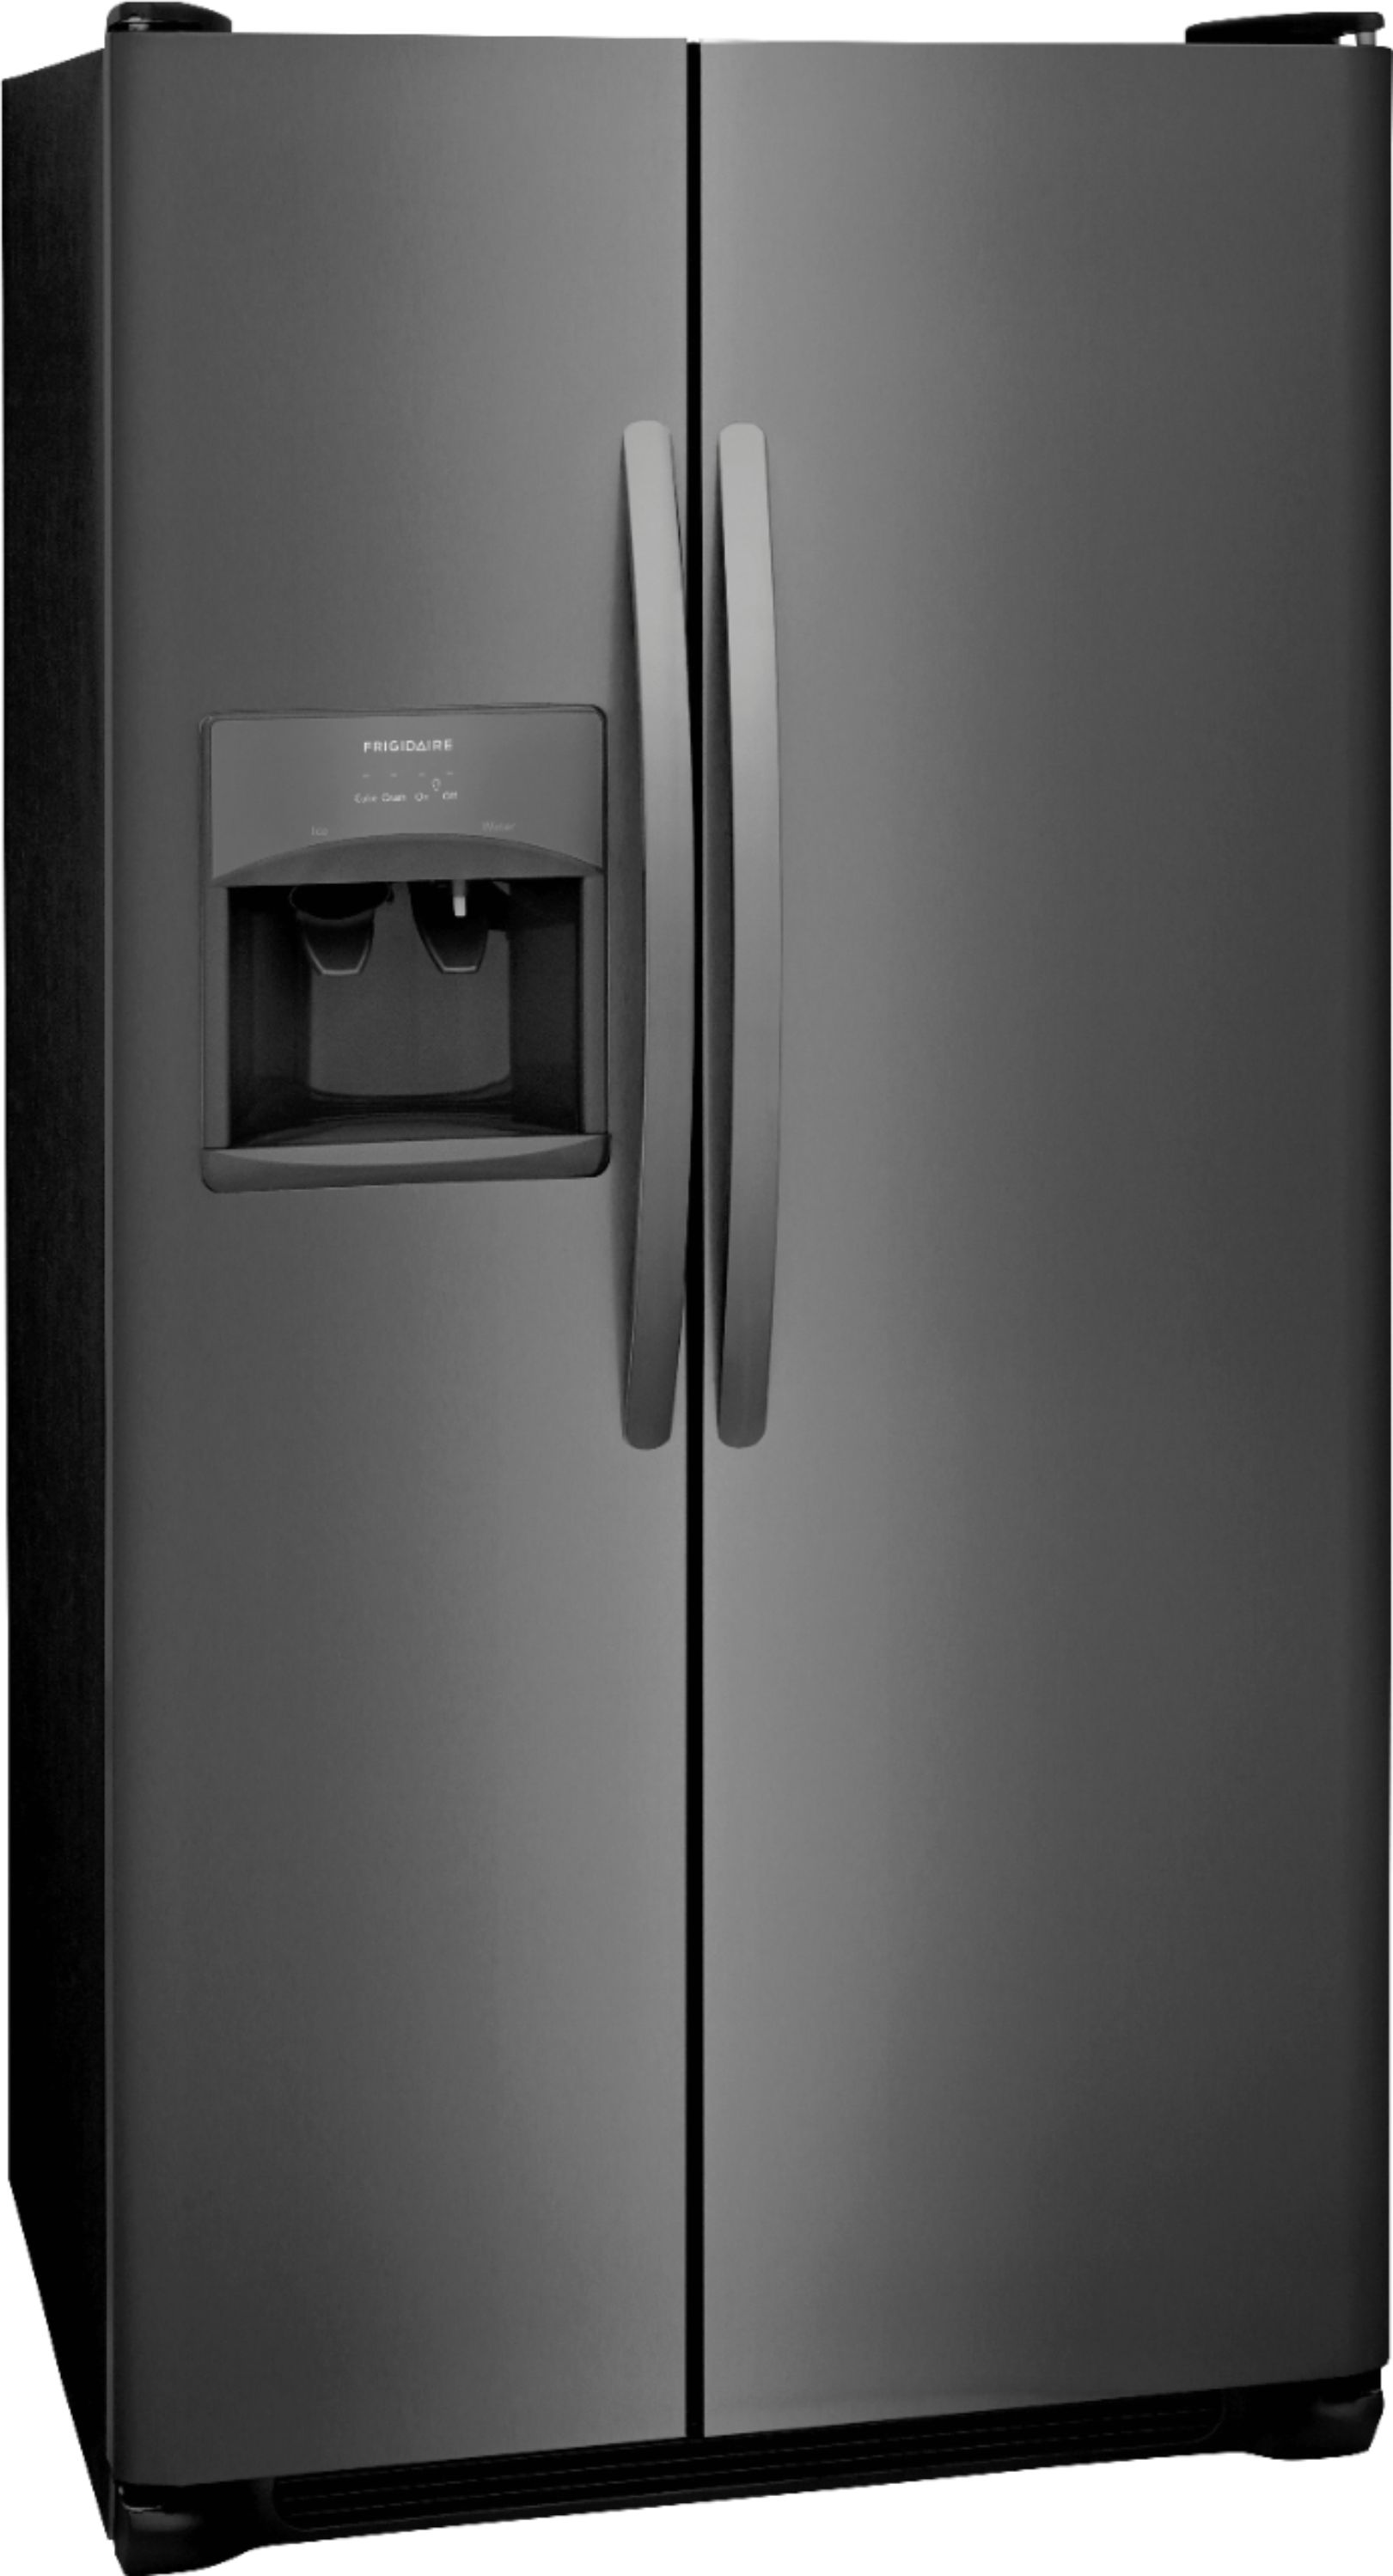 Angle View: Frigidaire - 24" Built-In Dishwasher - Black stainless steel